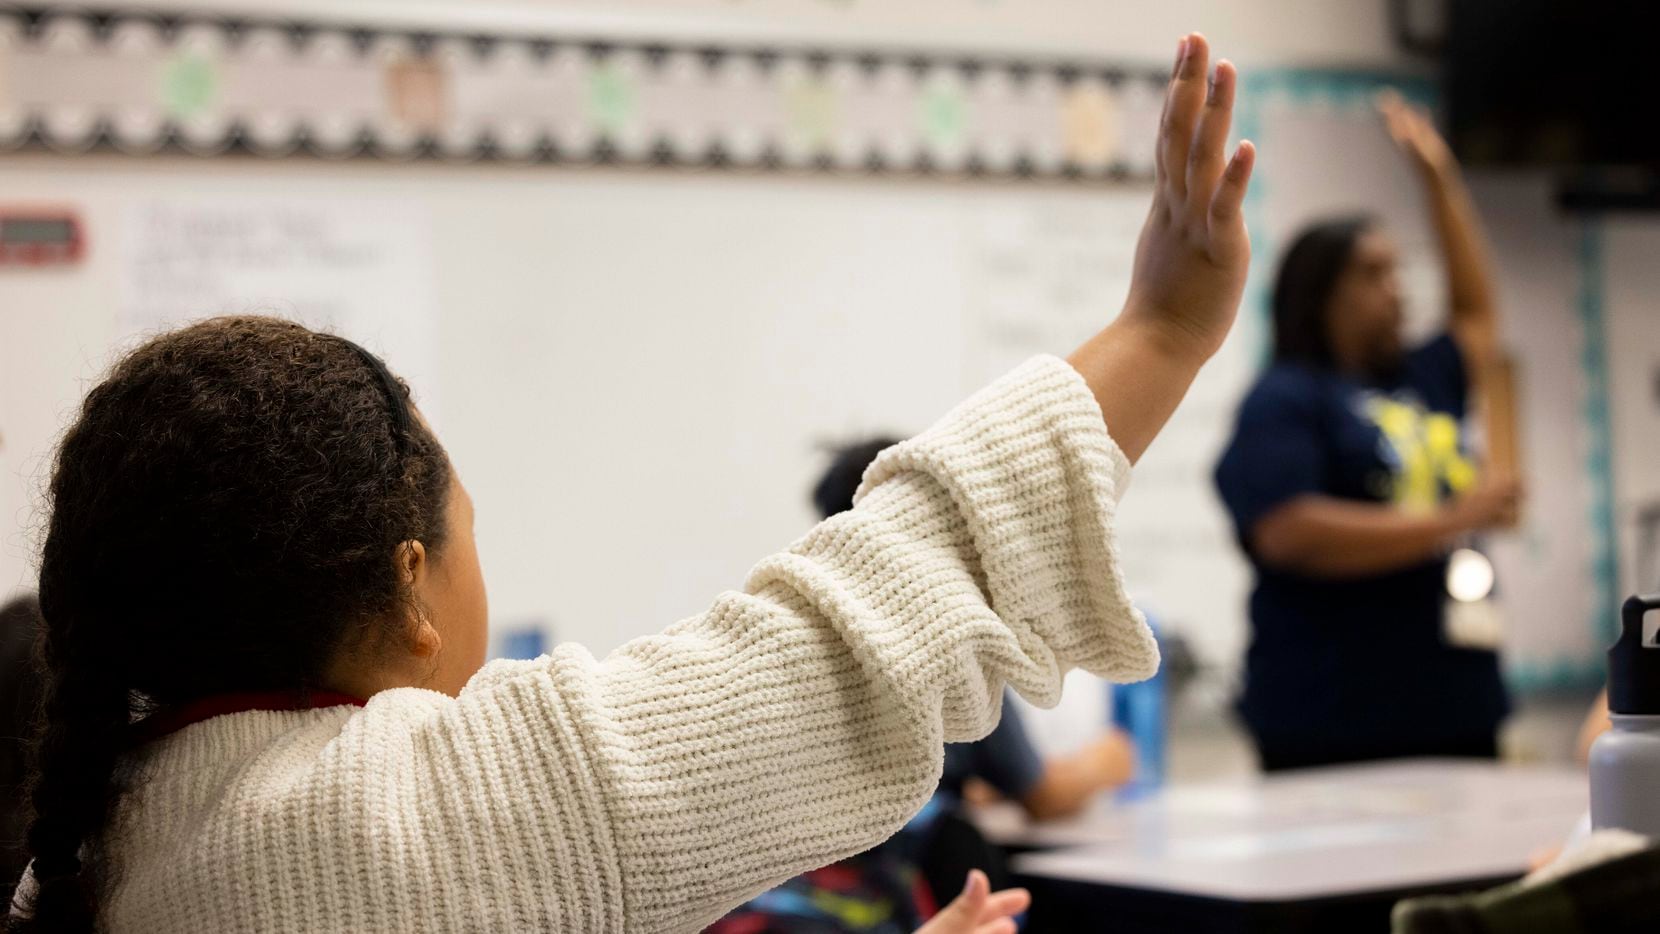 Large numbers of Texas teachers are seriously considering leaving the profession.